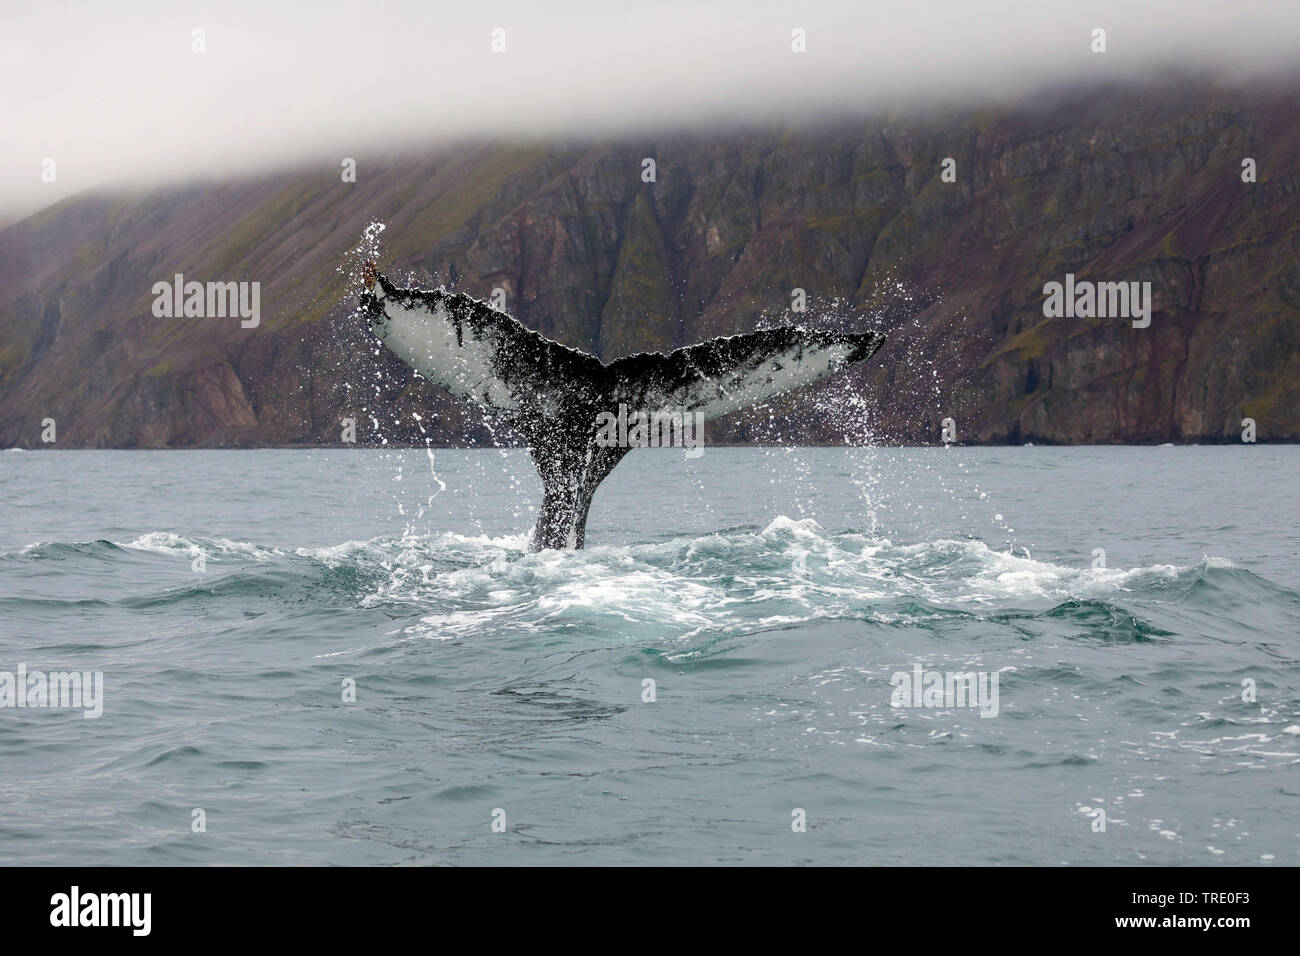 humpback whale (Megaptera novaeangliae), tail poking out ot the water, Iceland Stock Photo